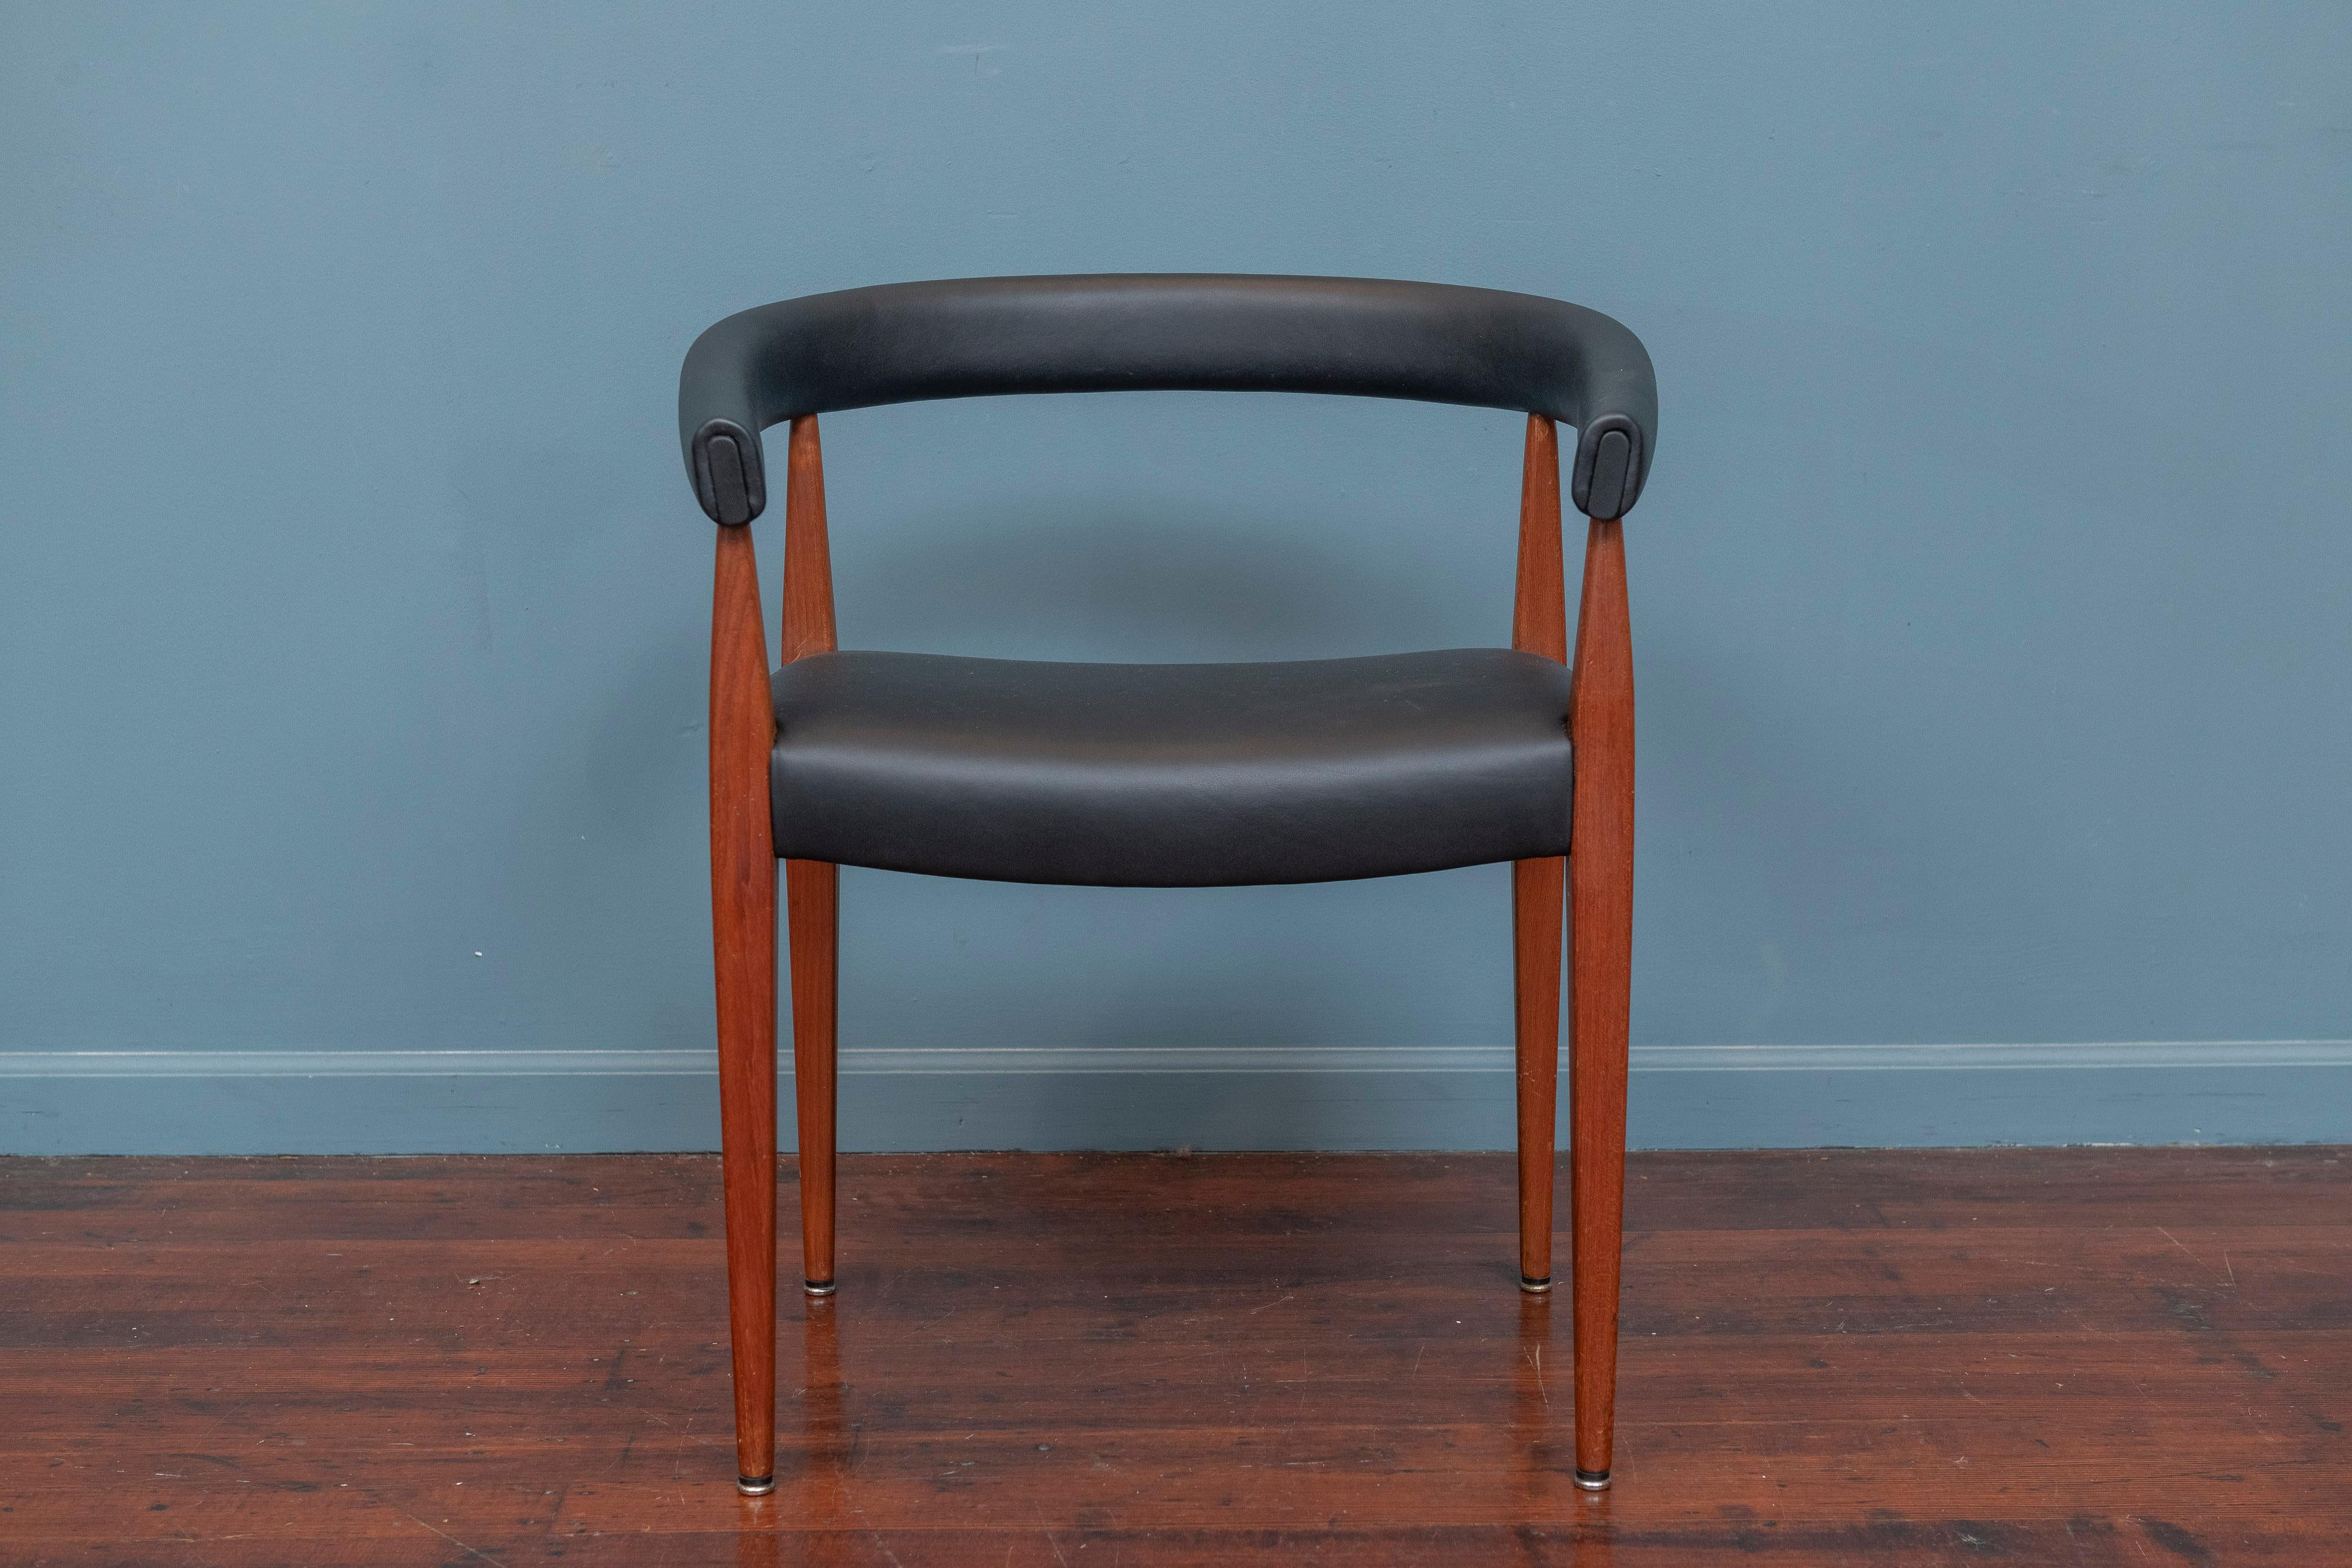 Rare and sculptural design armchair designed by Nanna Ditzel model #114 for Kolds Savvaerk, Denmark. Teak frame in very good original condition with new black leather upholstery, ready to be enjoyed.